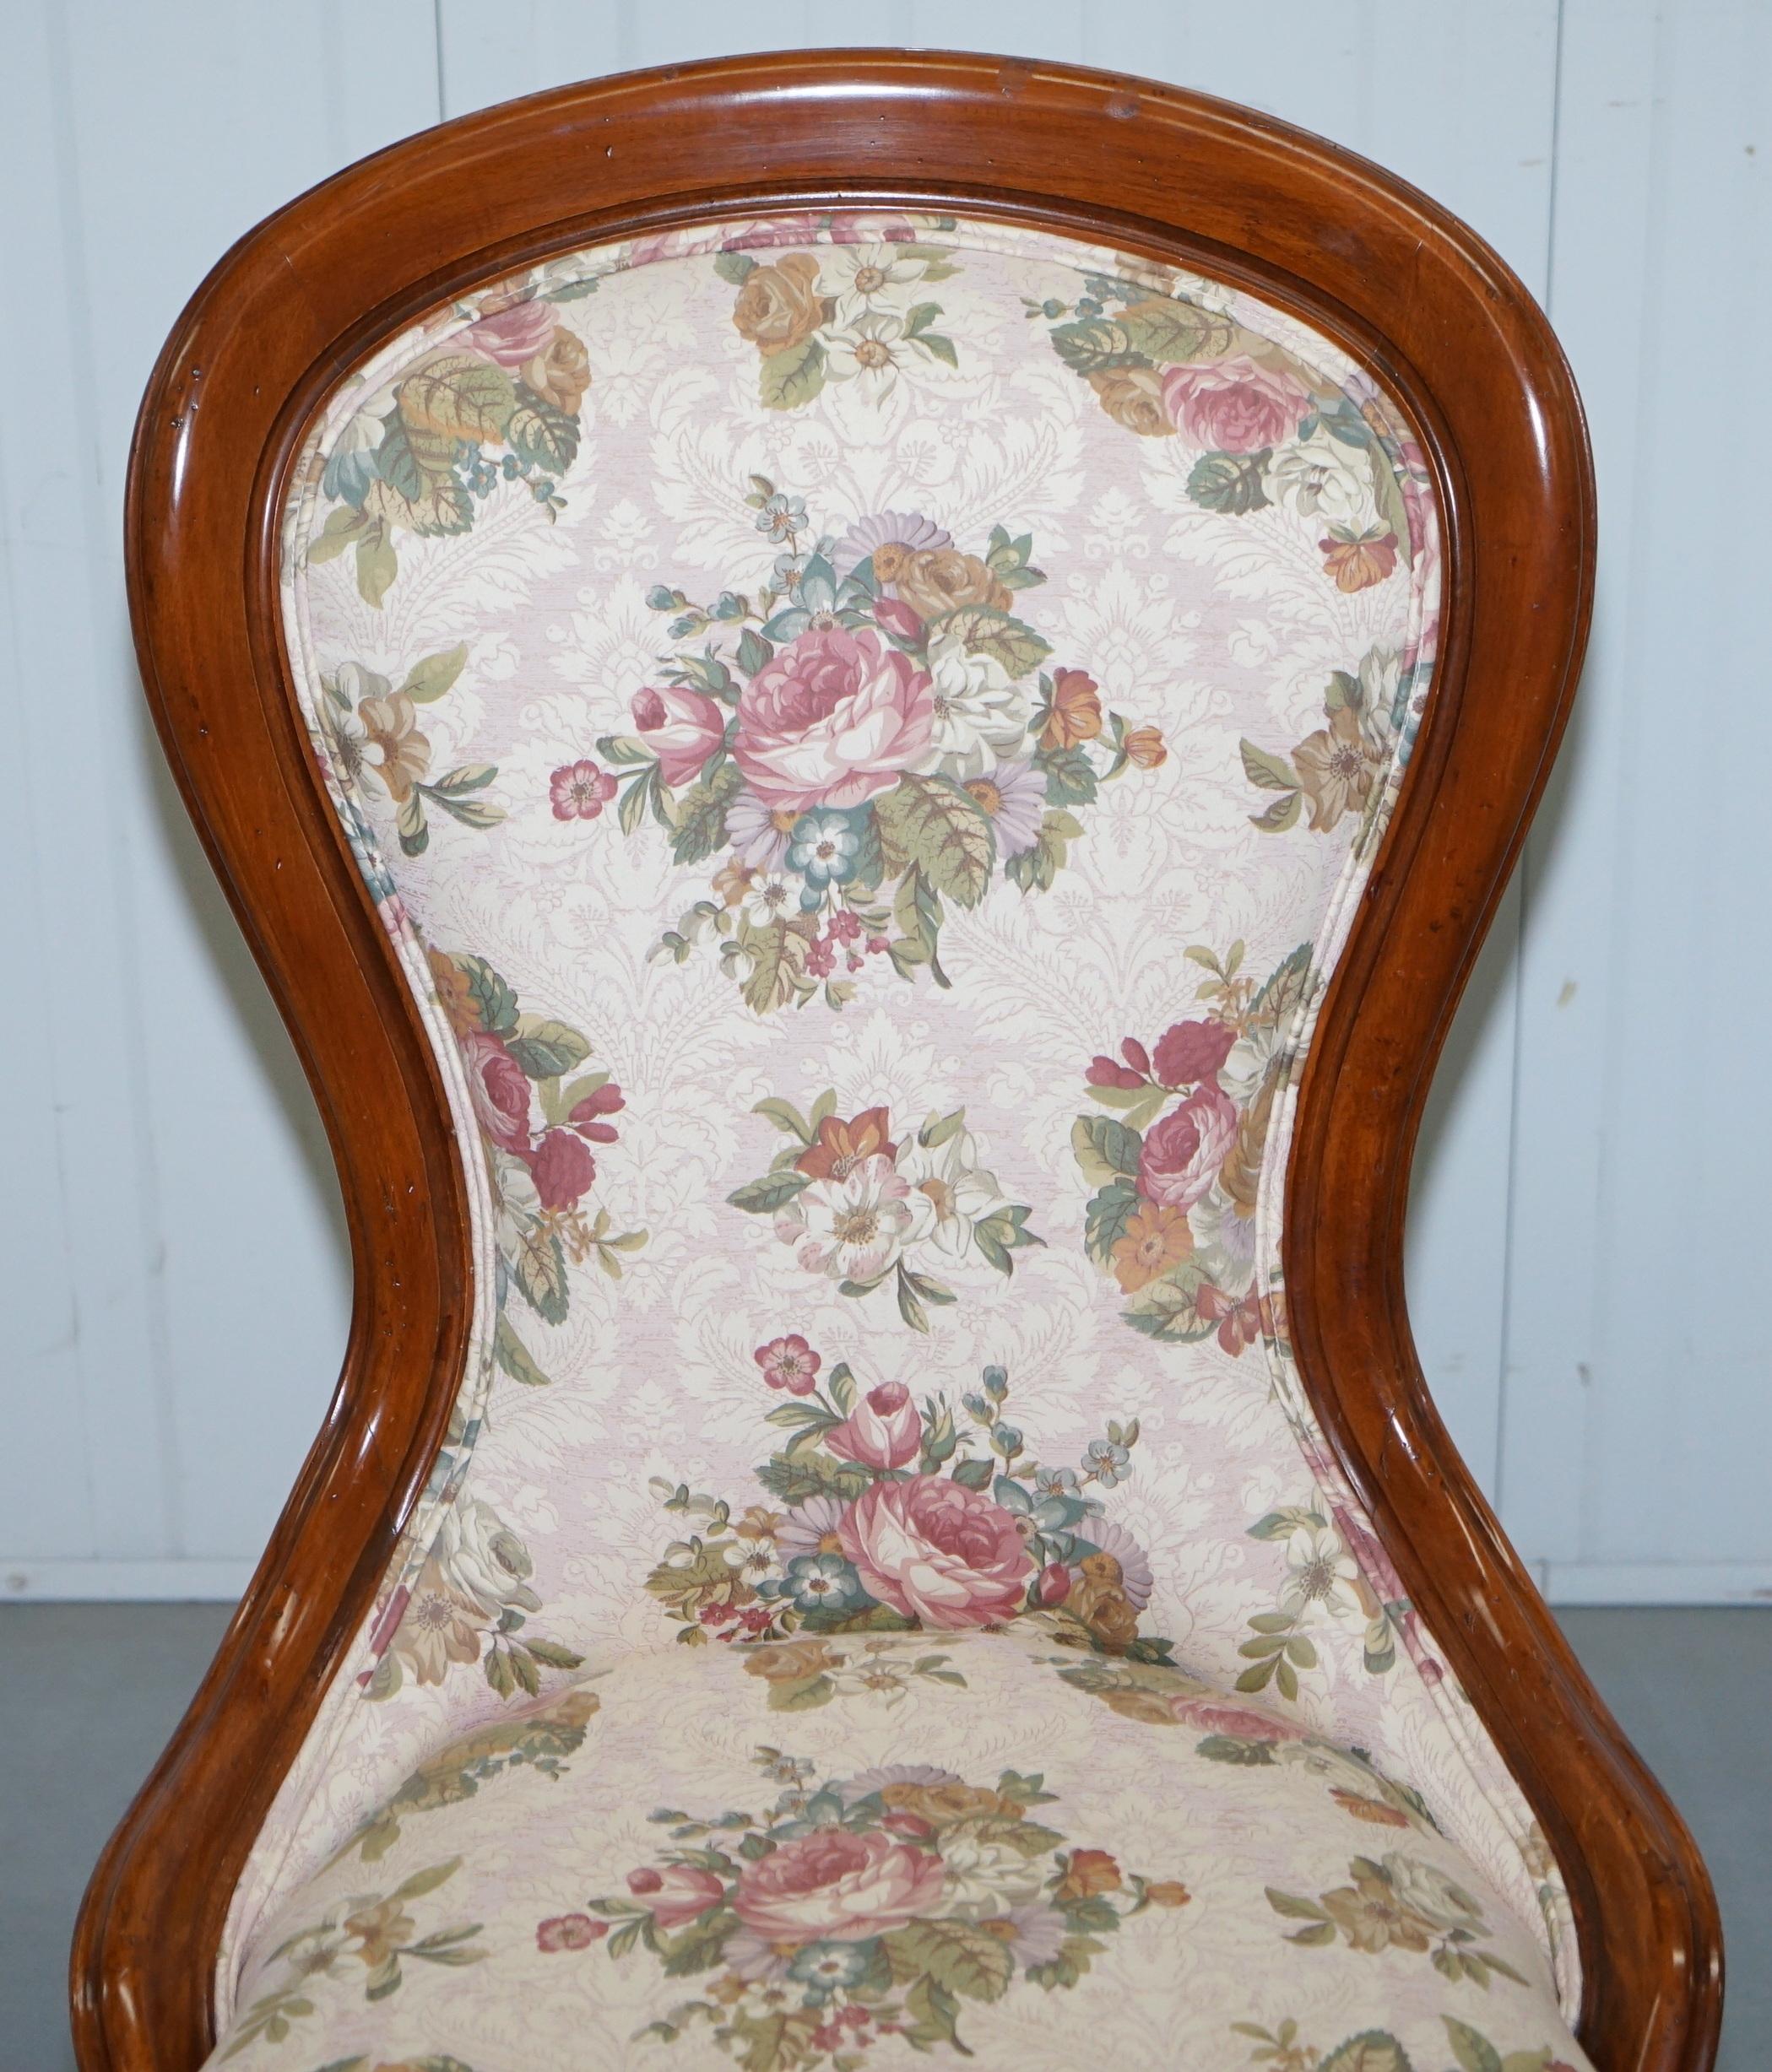 English Lovely Victorian Walnut Framed with Floral Upholstery Nursing Chair or Armchair